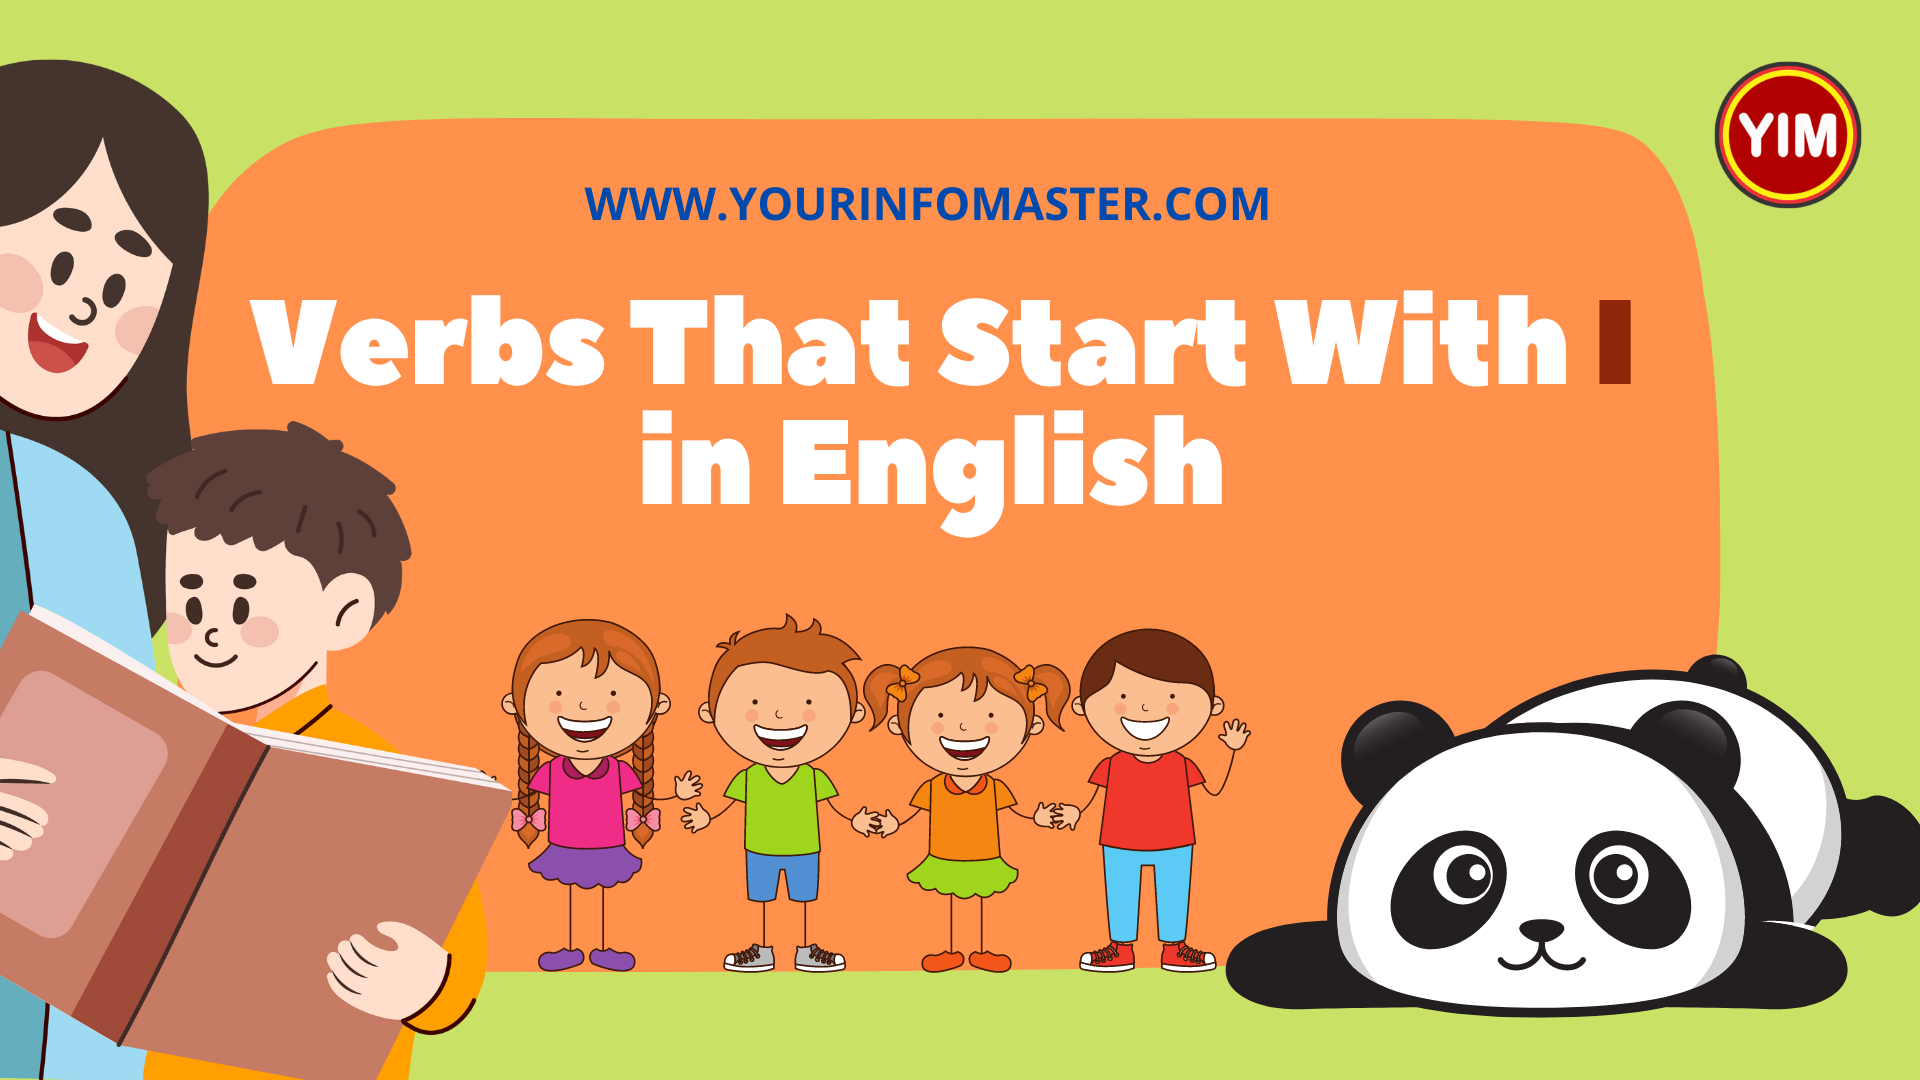 5 Letter Verbs, 5 Letter Verbs Starting With I, Action Words, Action Words That Start With I, English, English Grammar, English Vocabulary, English Words, I Action Words, I Verbs, I Verbs in English, List of Verbs That Start With I, Verbs List, Verbs That Start With I, Vocabulary, Words That Start with i